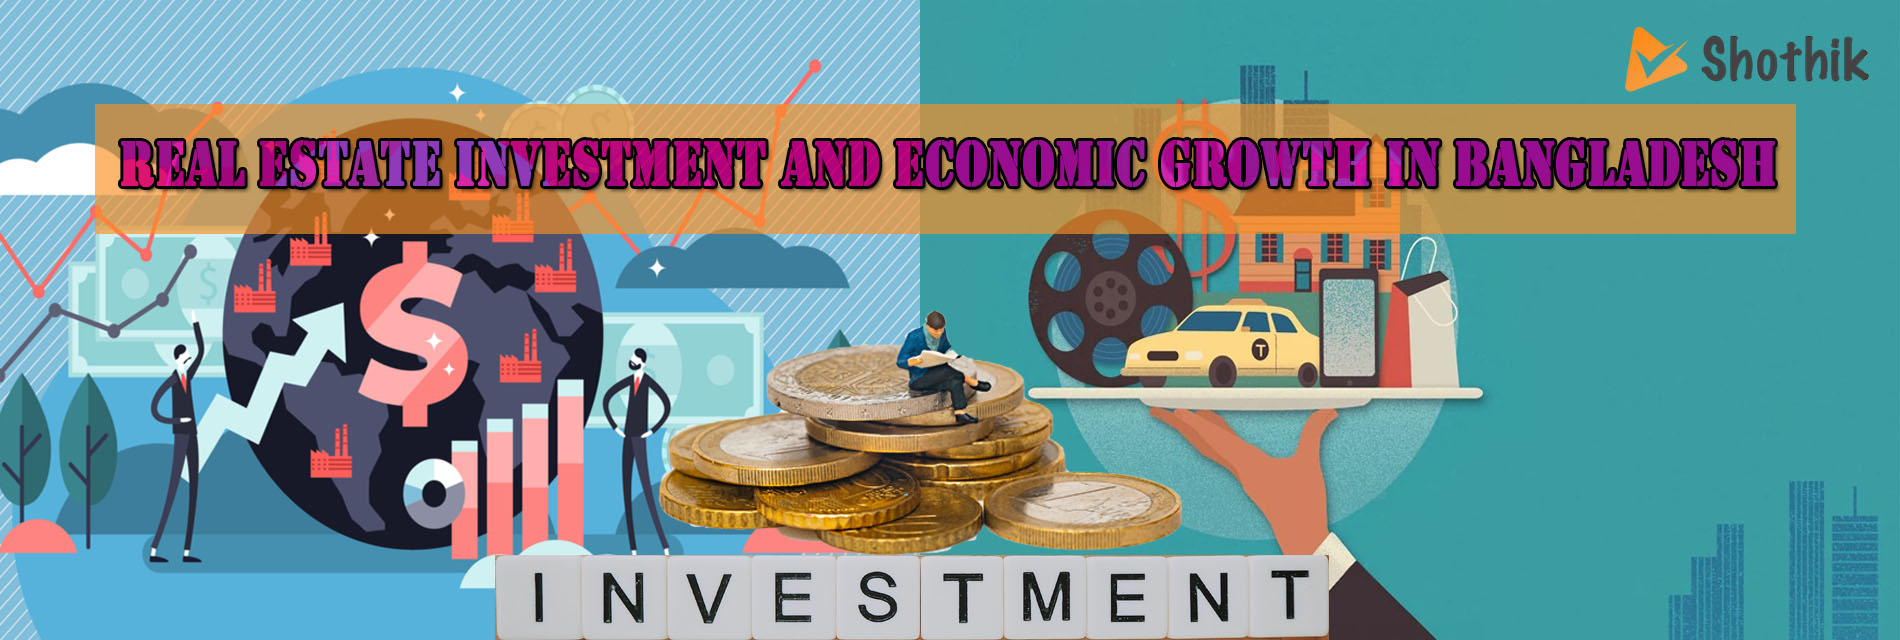 Real Estate Investment And Economic Growth In Bangladesh